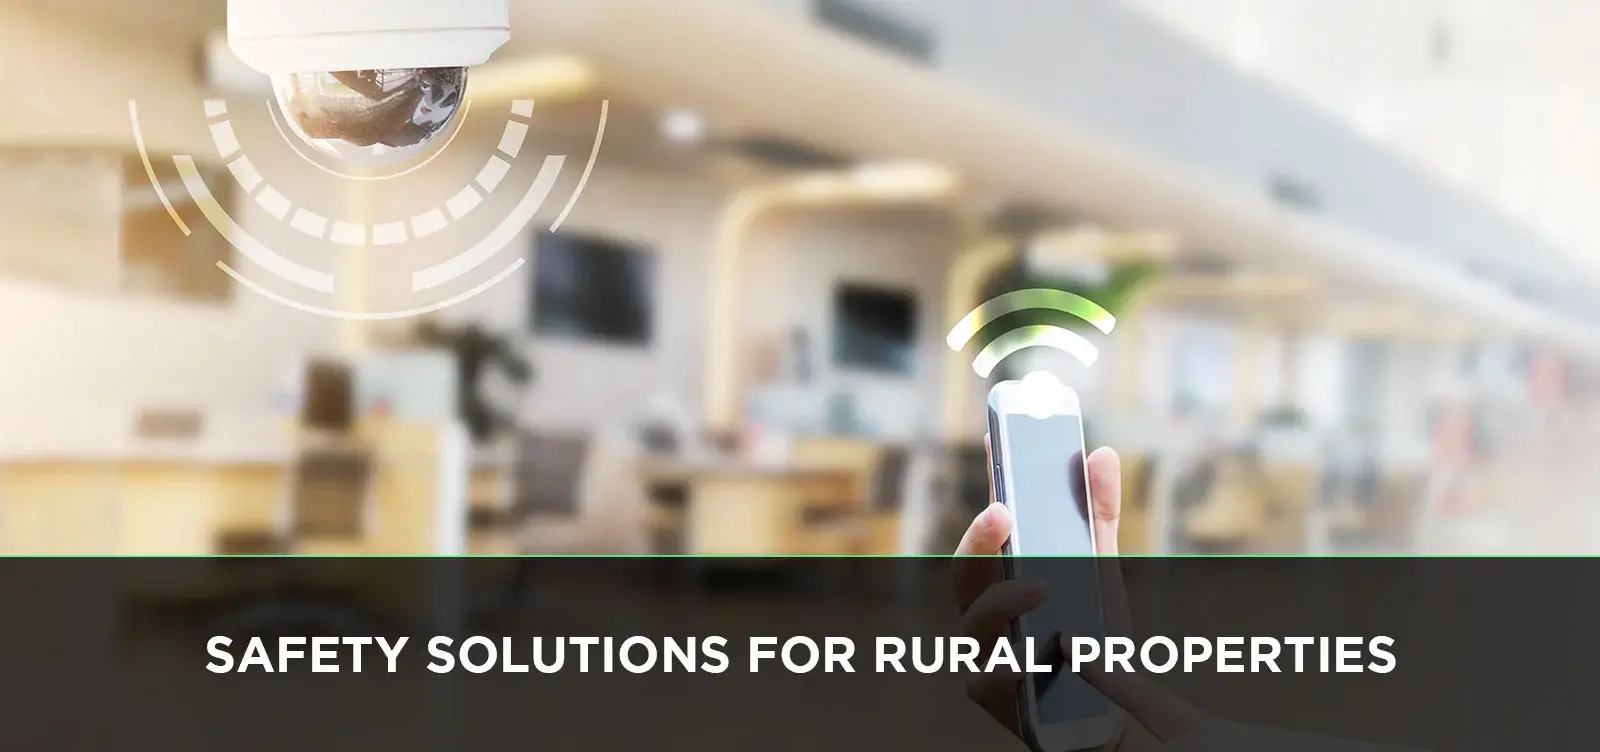 Safety Solutions for Rural Properties